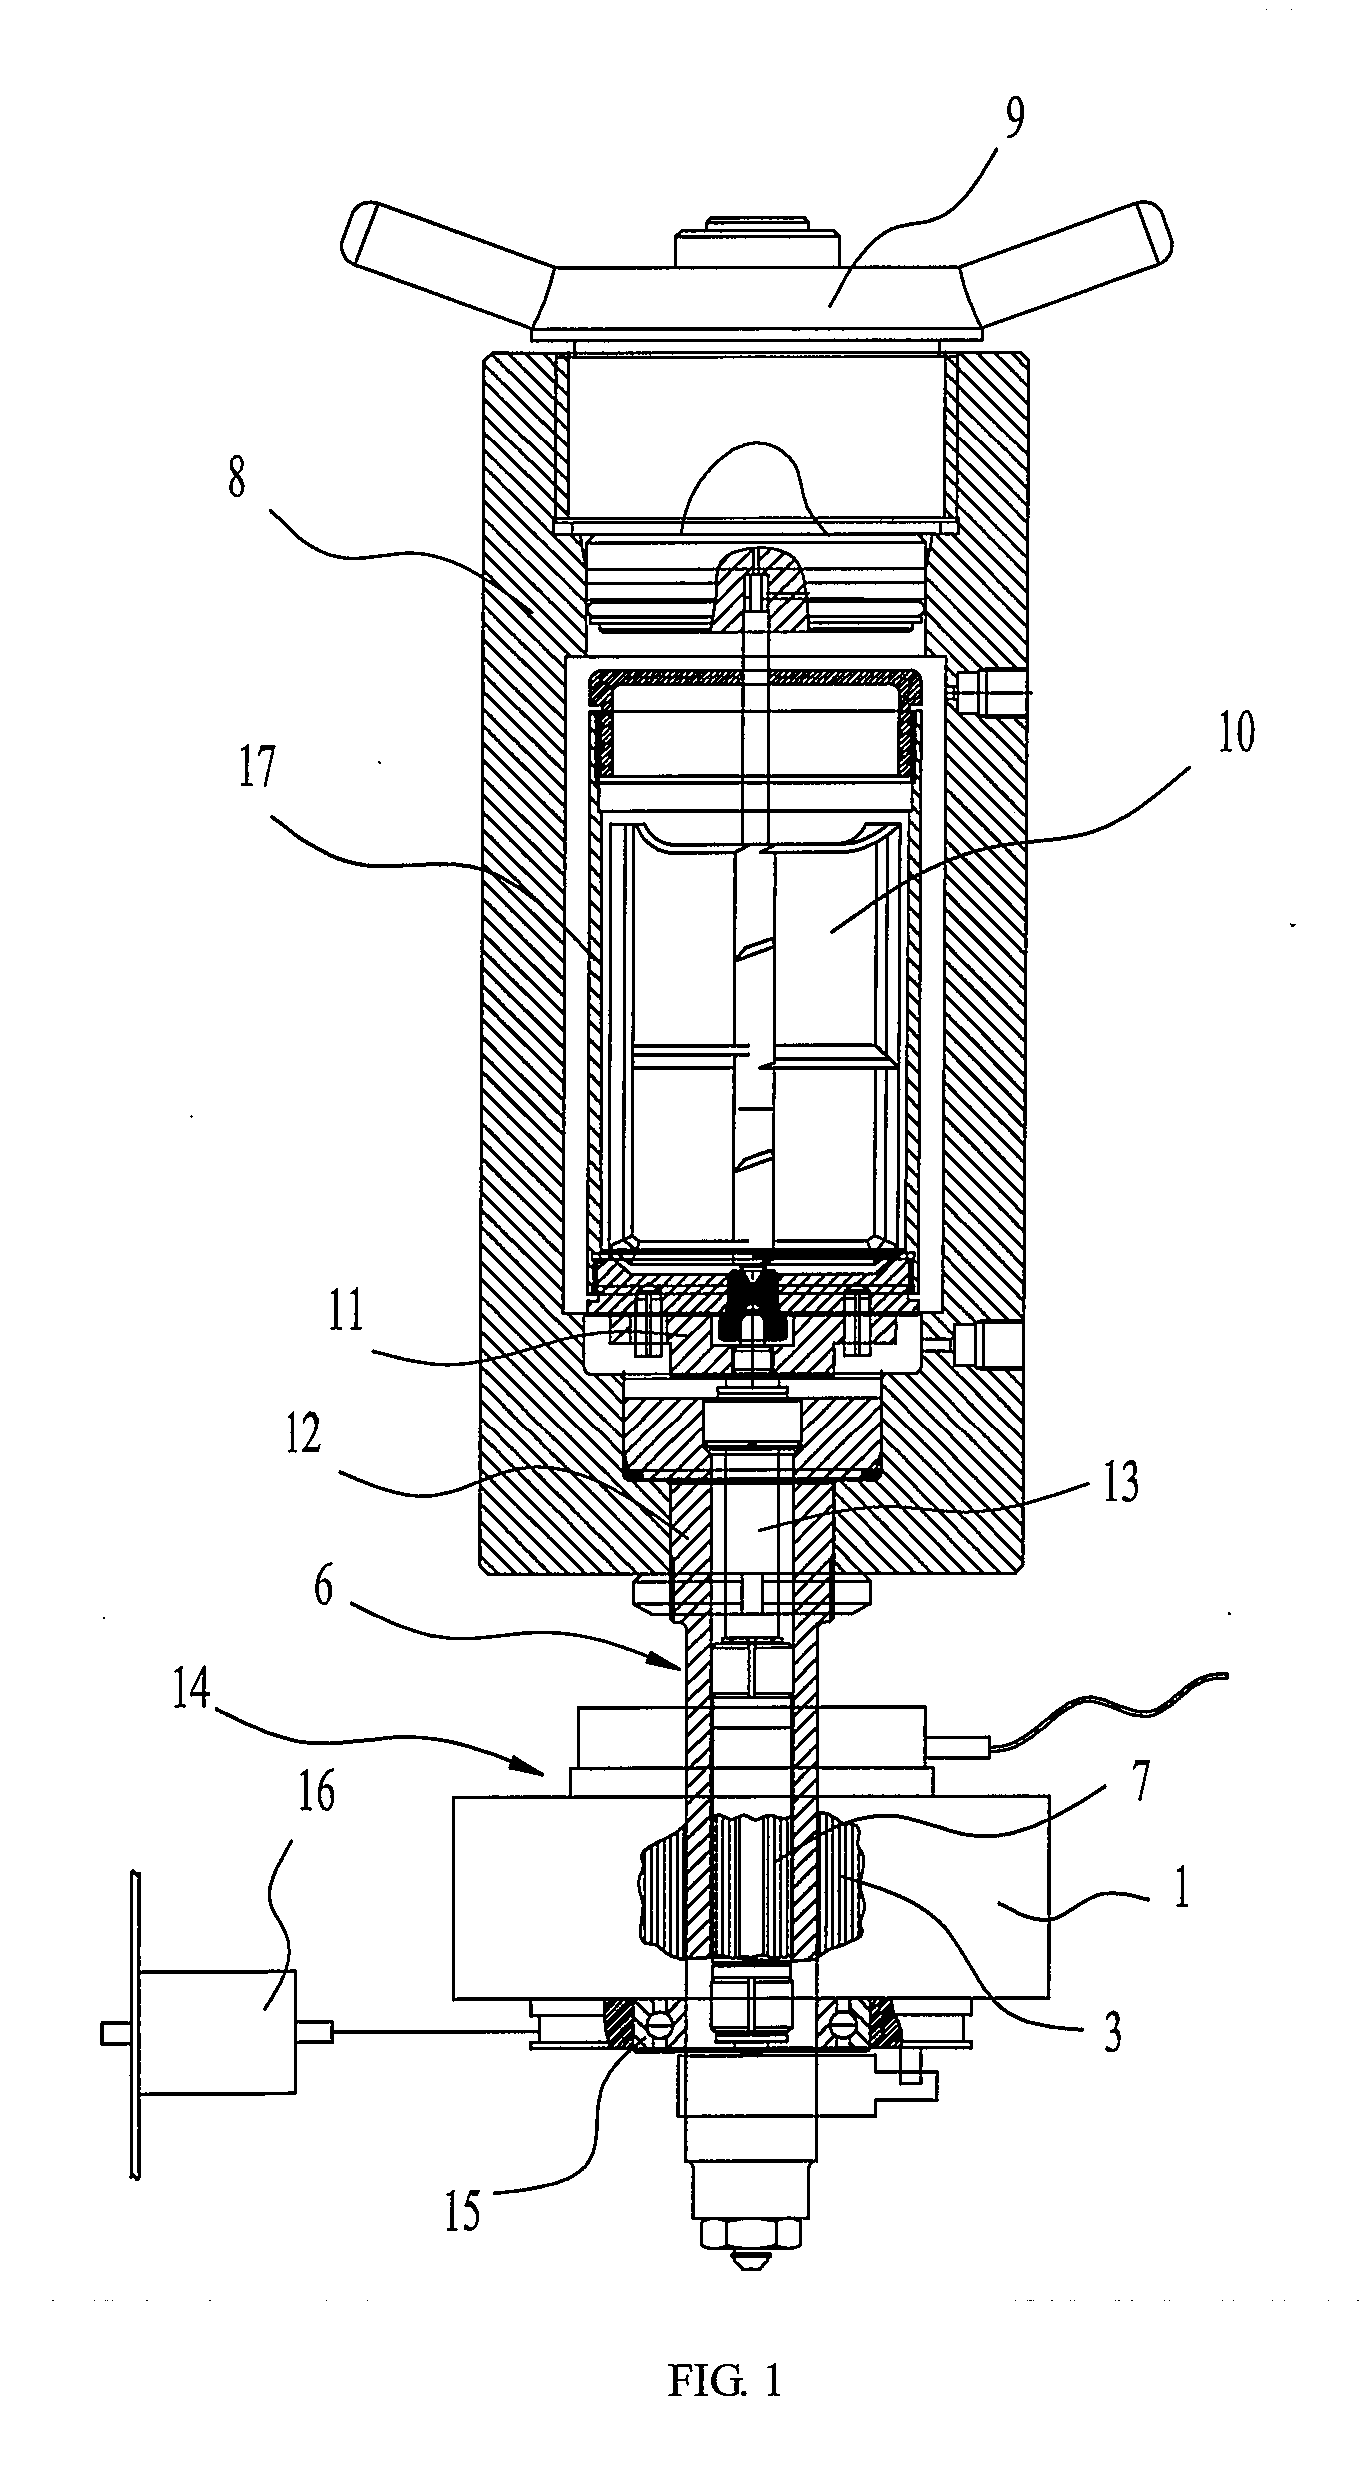 Measuring device for measuring consistency of cement slurry for a consistometer